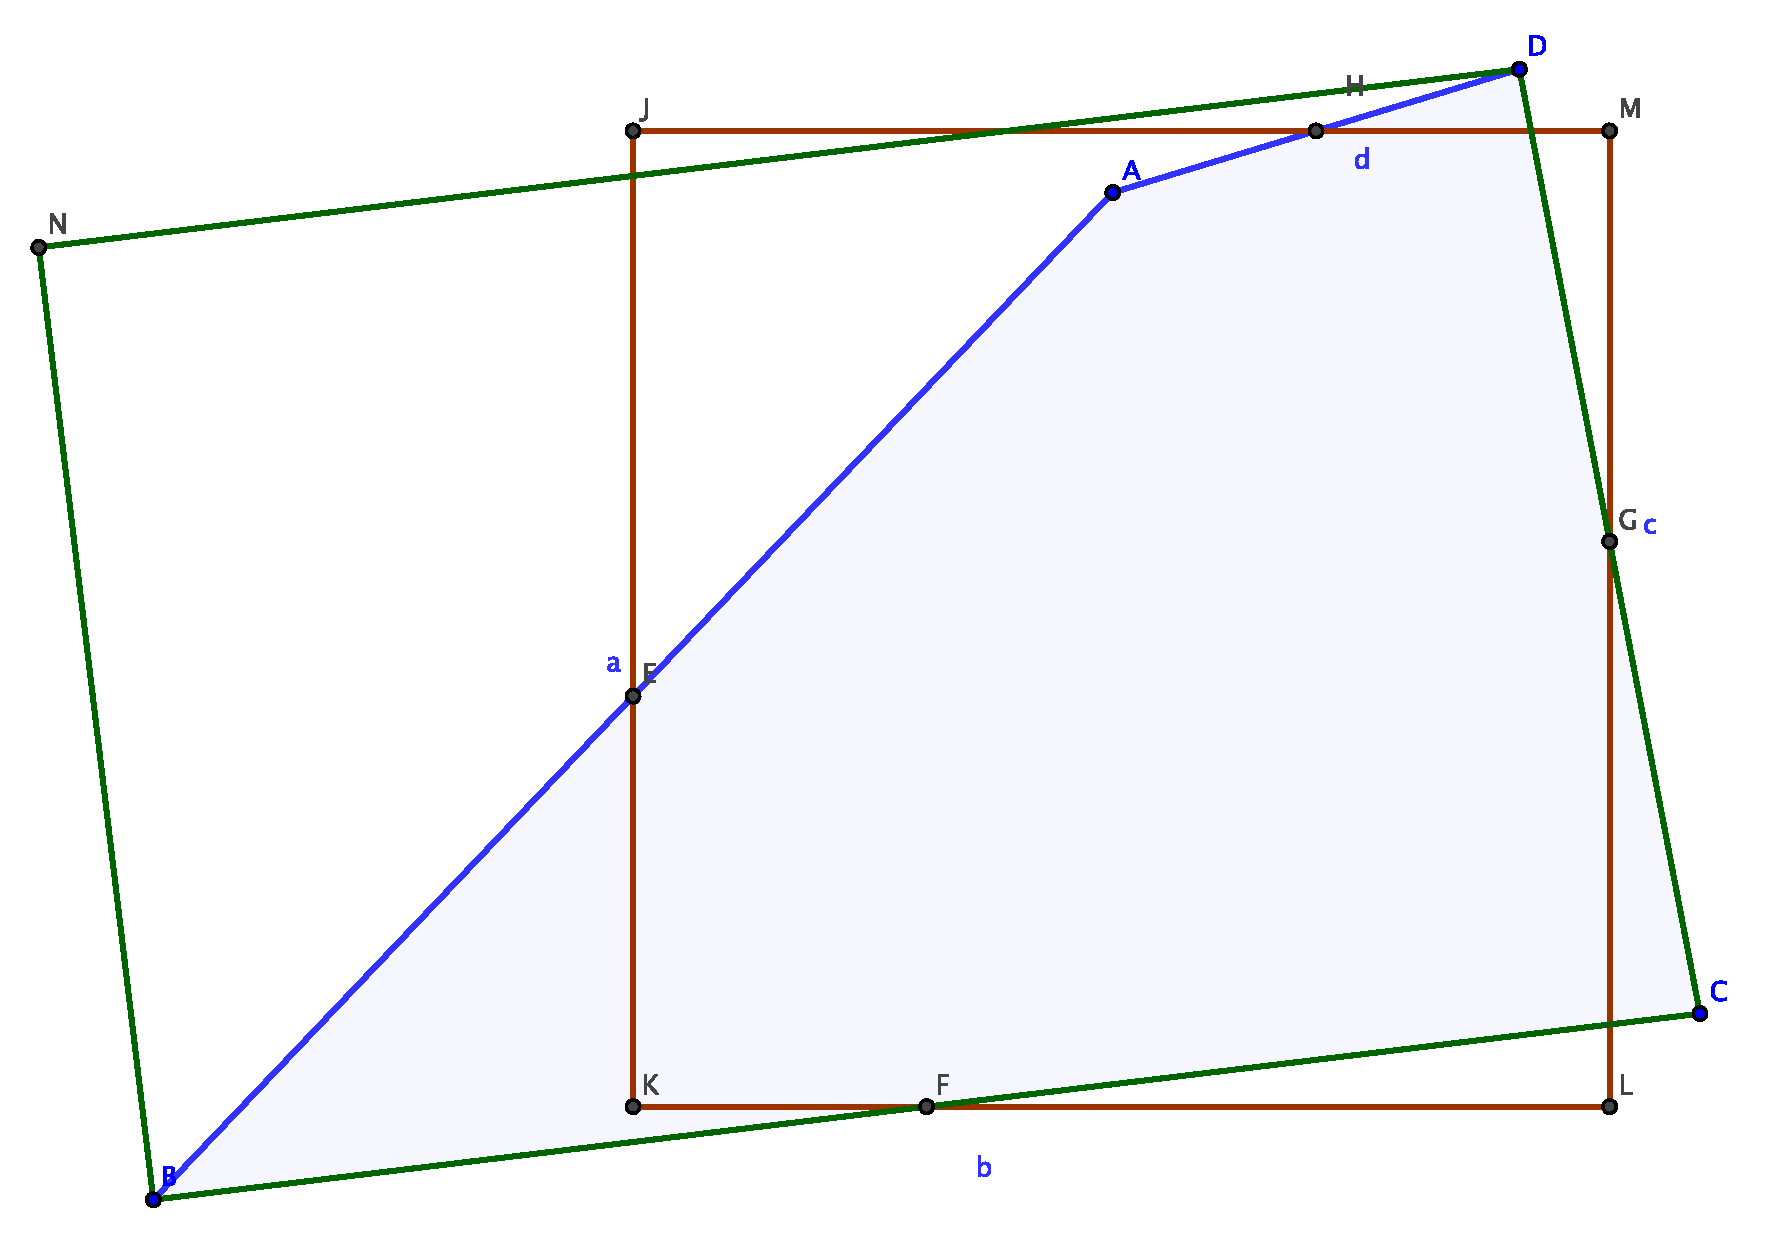 Surface Smoothing and Quality Improvement of Quadrilateral